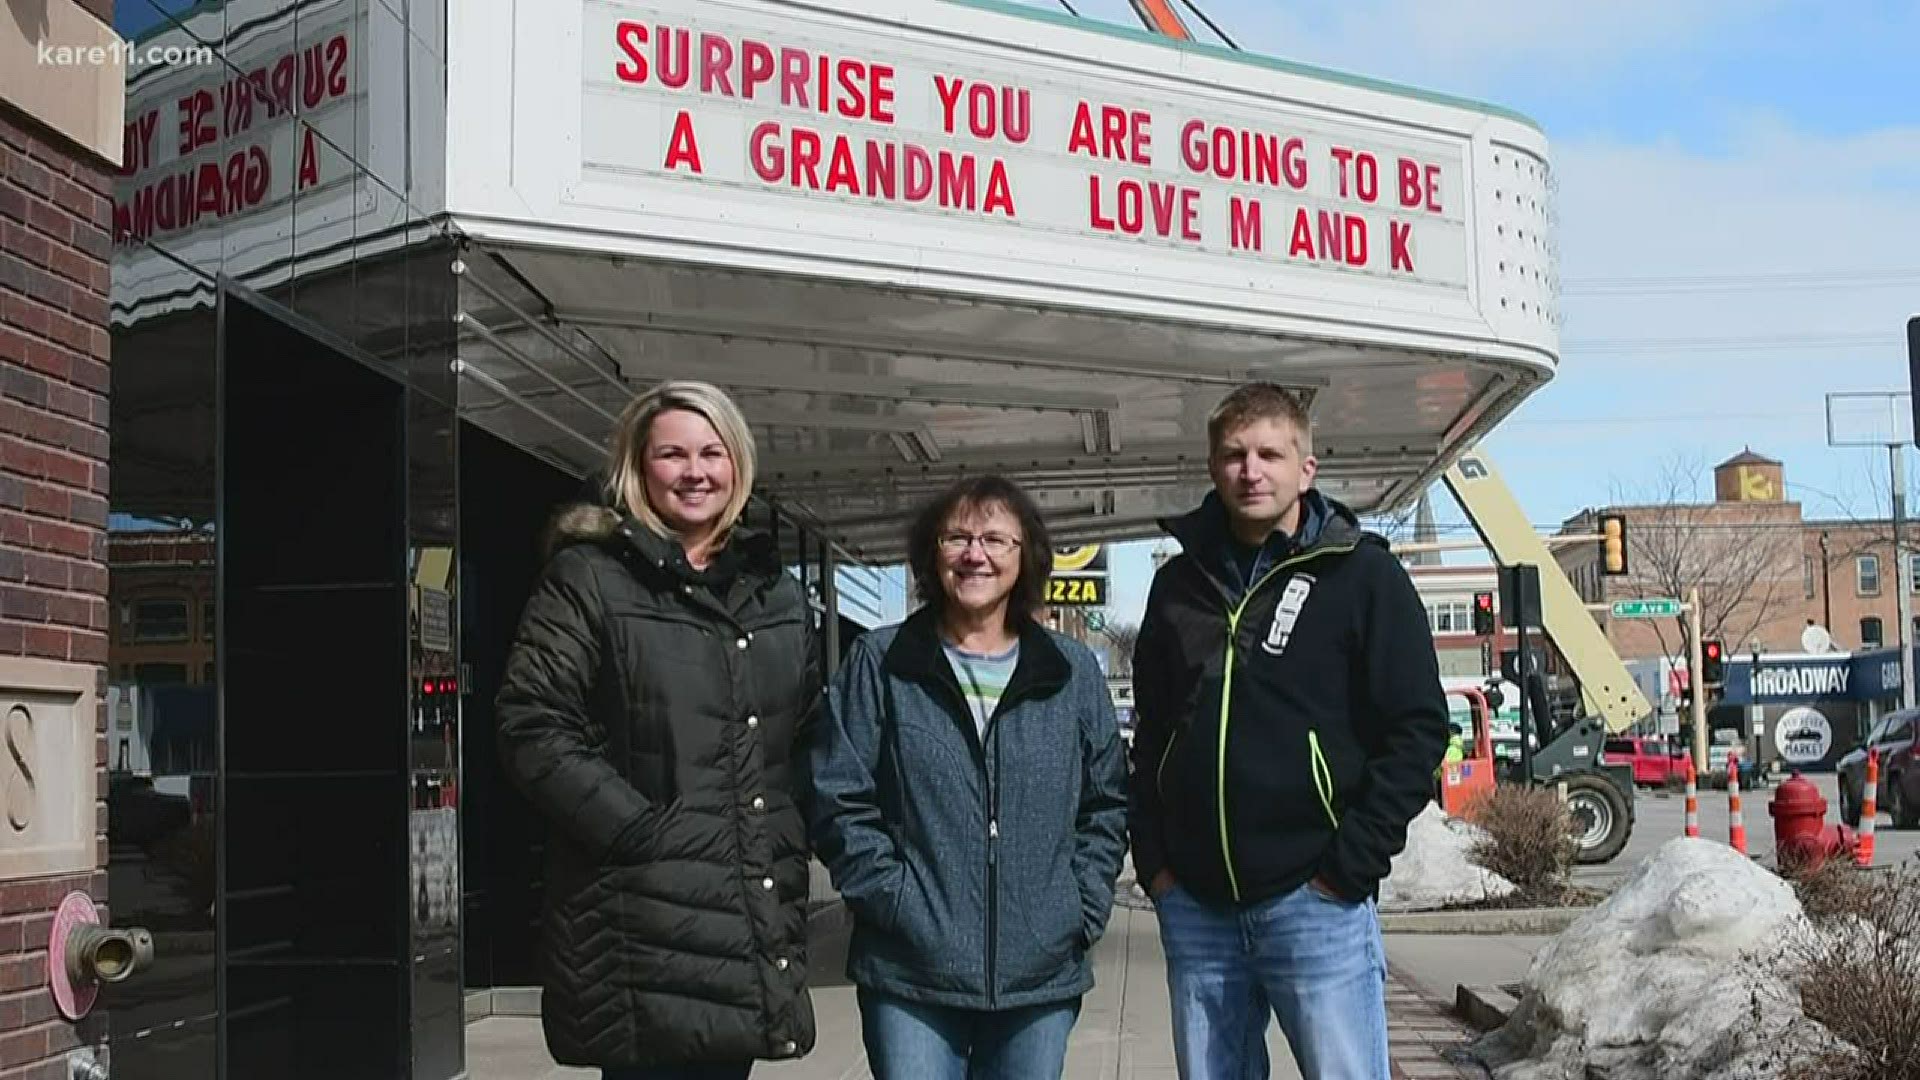 Kristina Landin surprised her mom by renting space on a movie marquee.